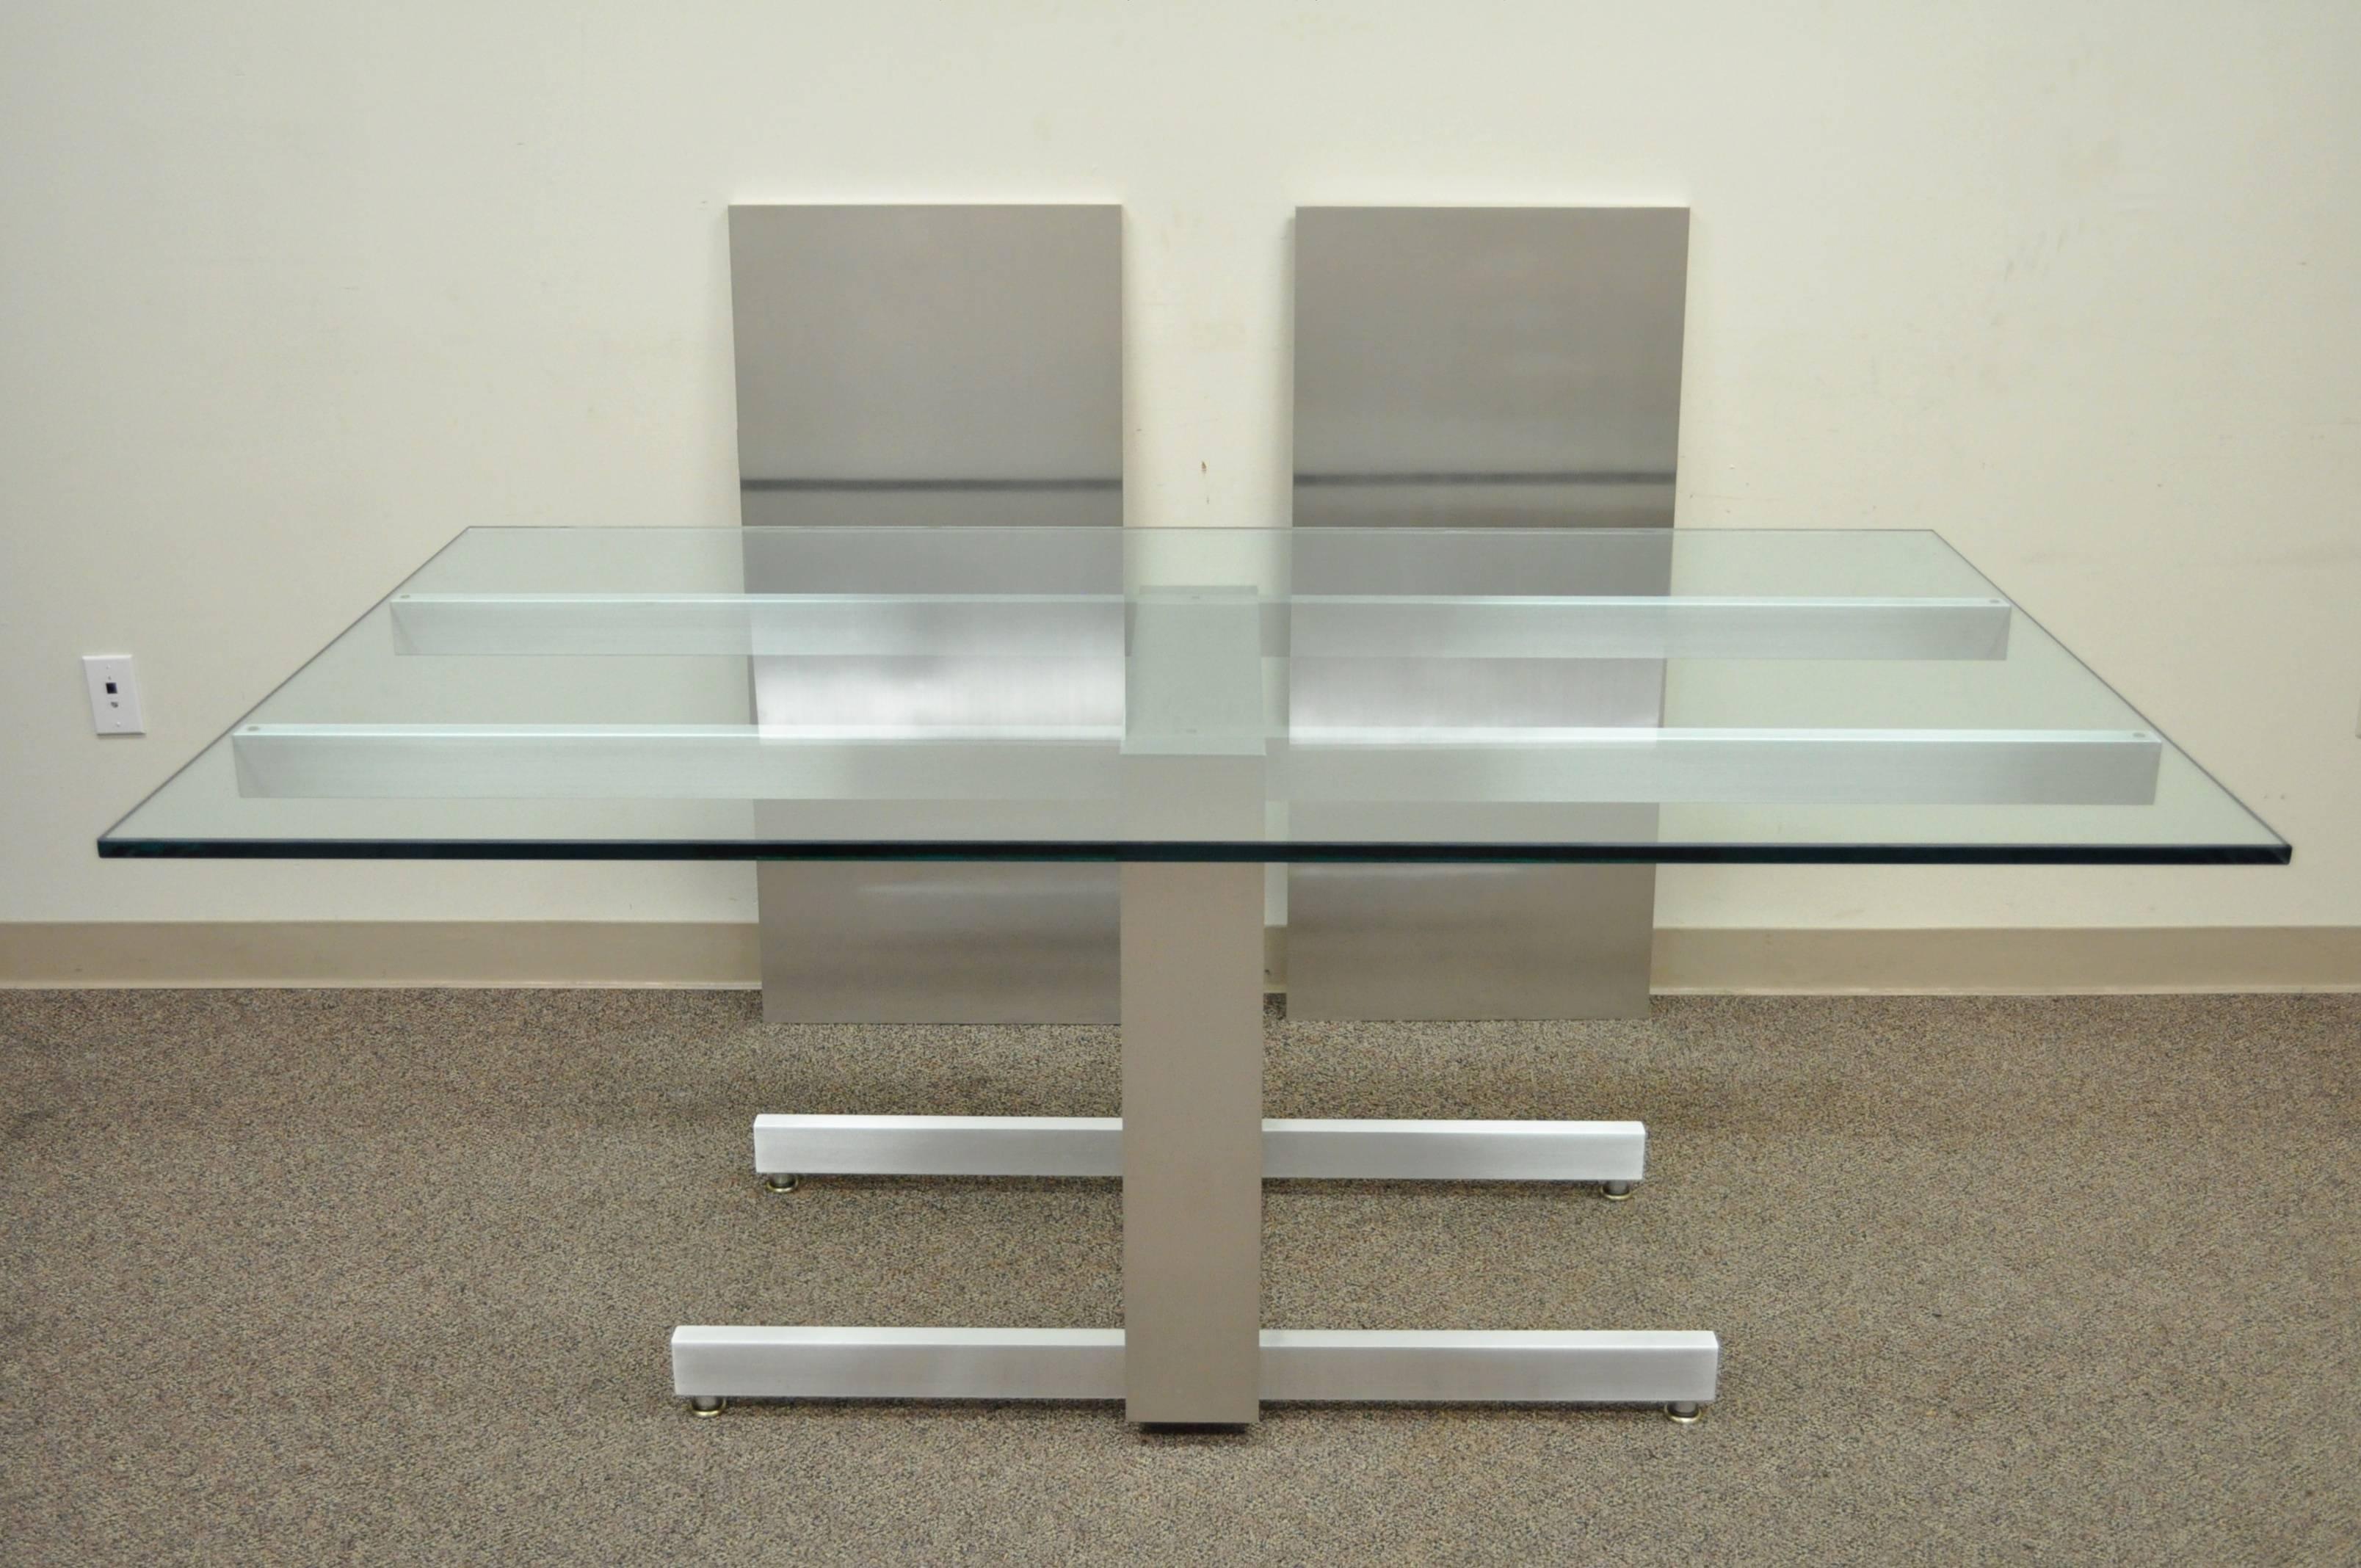 Breathtaking 1960s, Mid-Century Modern, Vladimir Kagan dining table with two leaves. Item features a brilliant brushed aluminum pedestal base with pull out supports for the two brushed aluminum 20